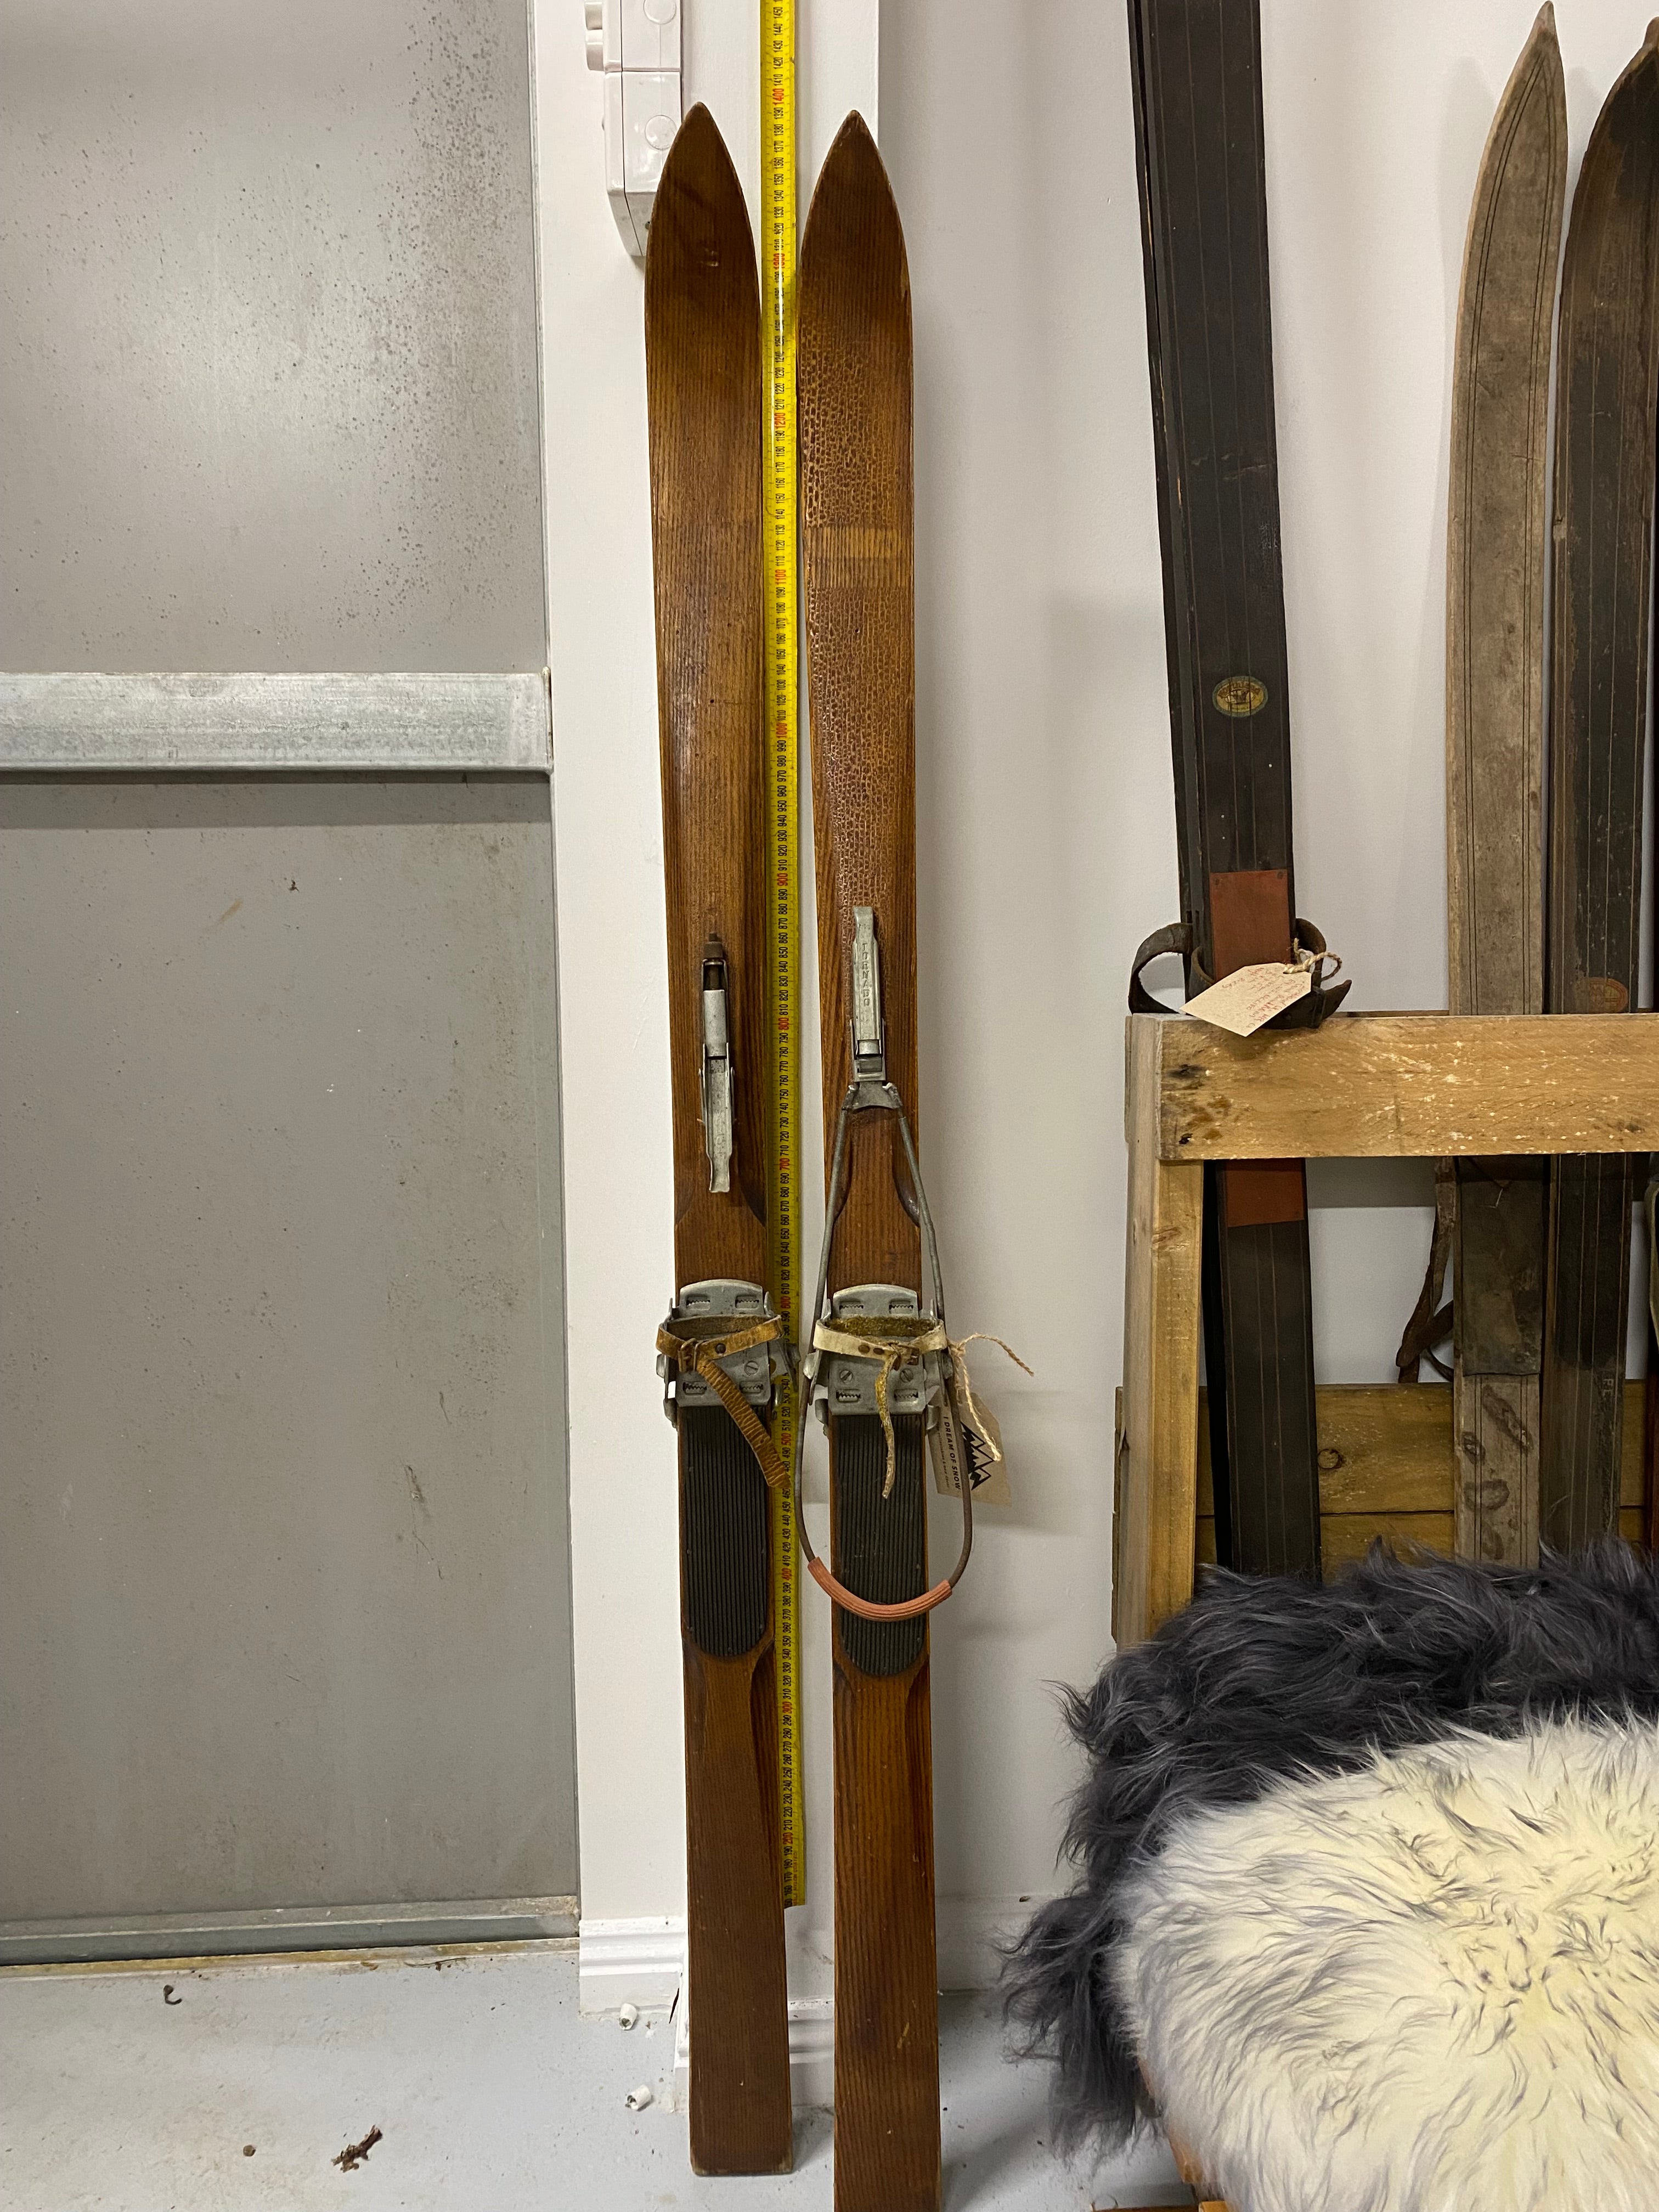 Full Height front view: unbranded vintage wooden skis with Tornado metal bindings. leaning against white painted wall with yellow measuring tape. On the right hand side are a number of stacked vintage skis.